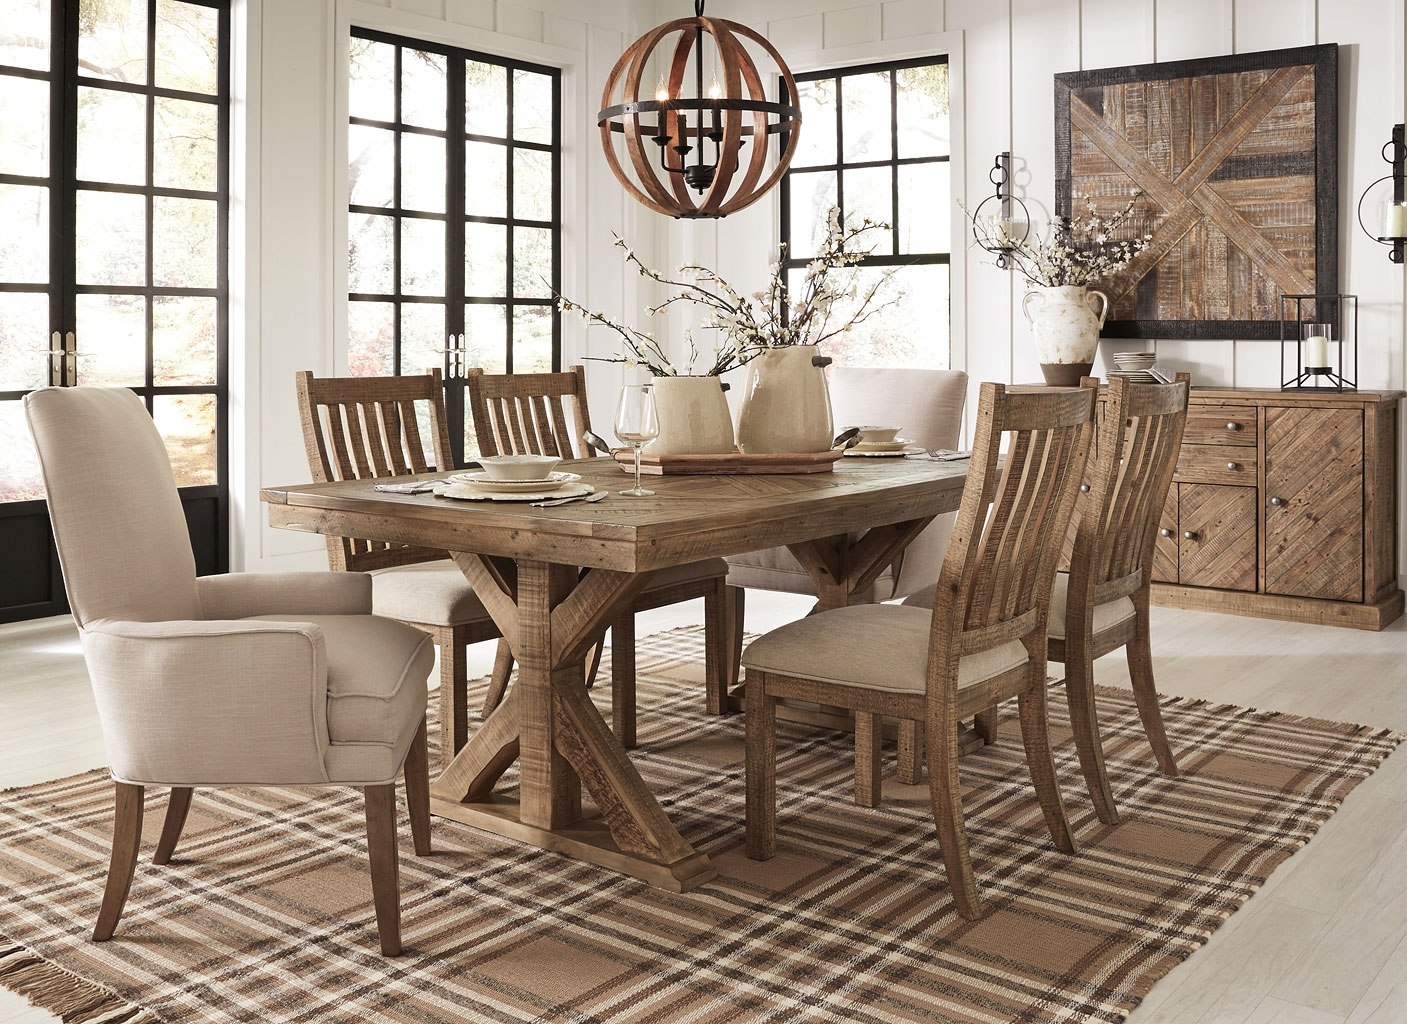 Grindleburg Dining Room Set w/ Light Brown Chairs Signature Design by ...